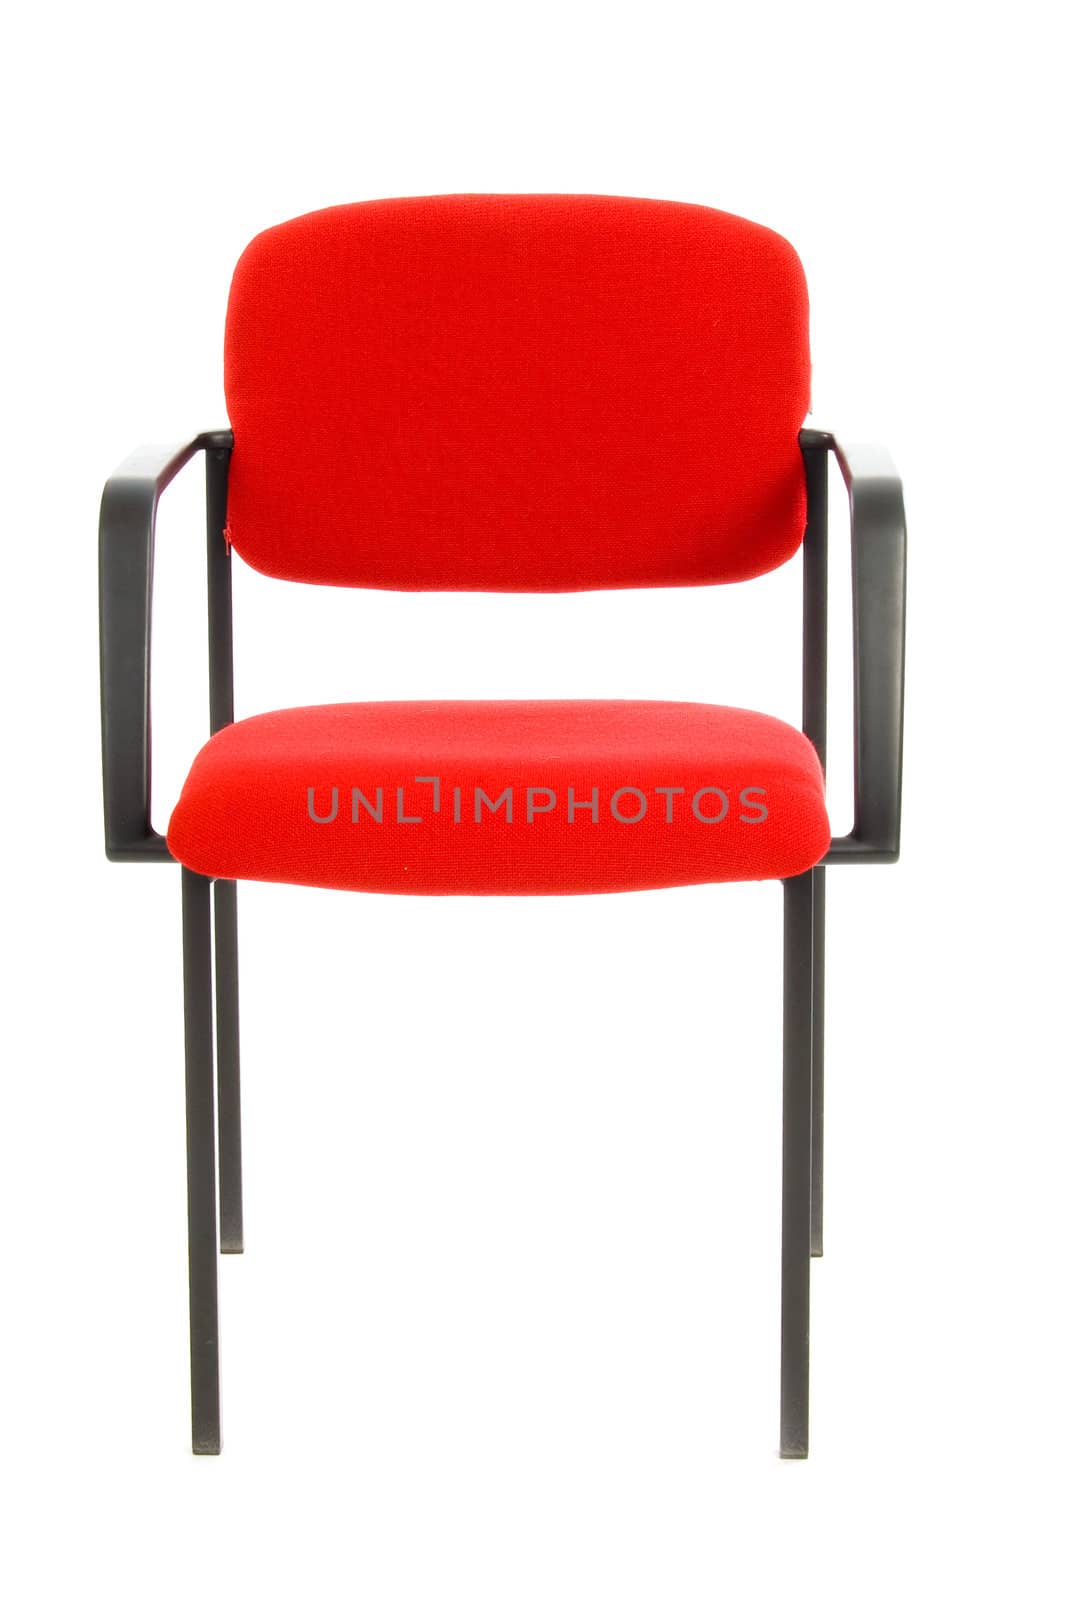 red office chair isolated on white by ladyminnie